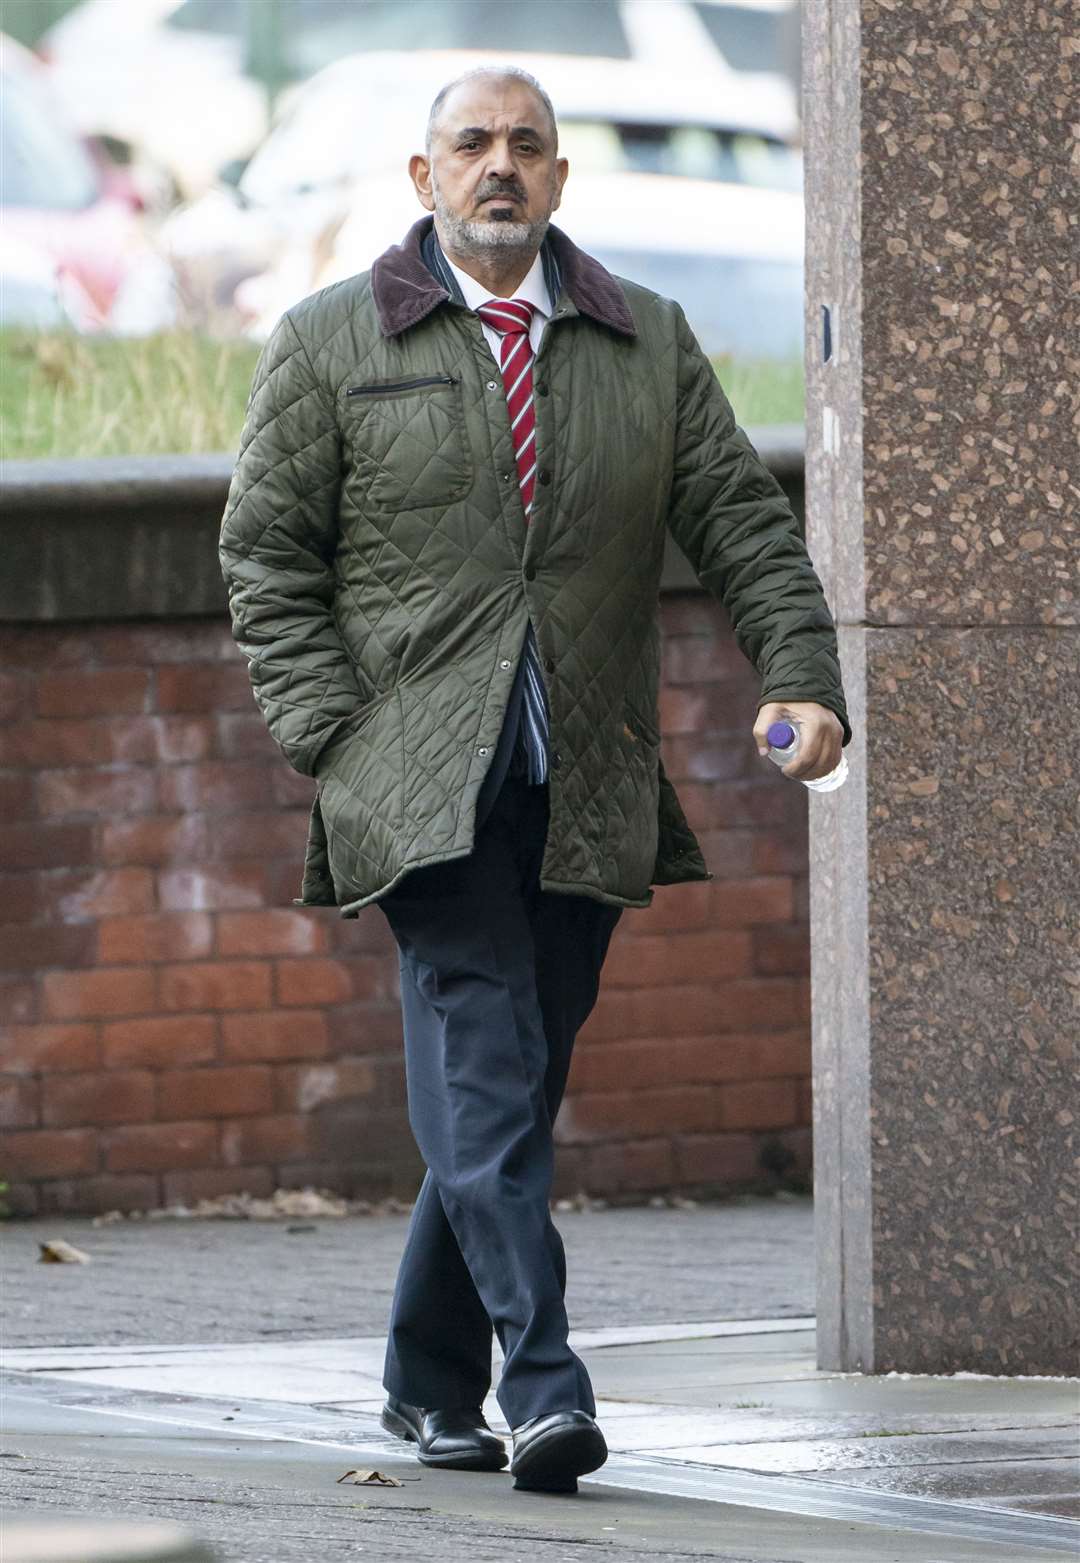 Ahmed arriving at Sheffield Crown Court in November 2021 (PA)